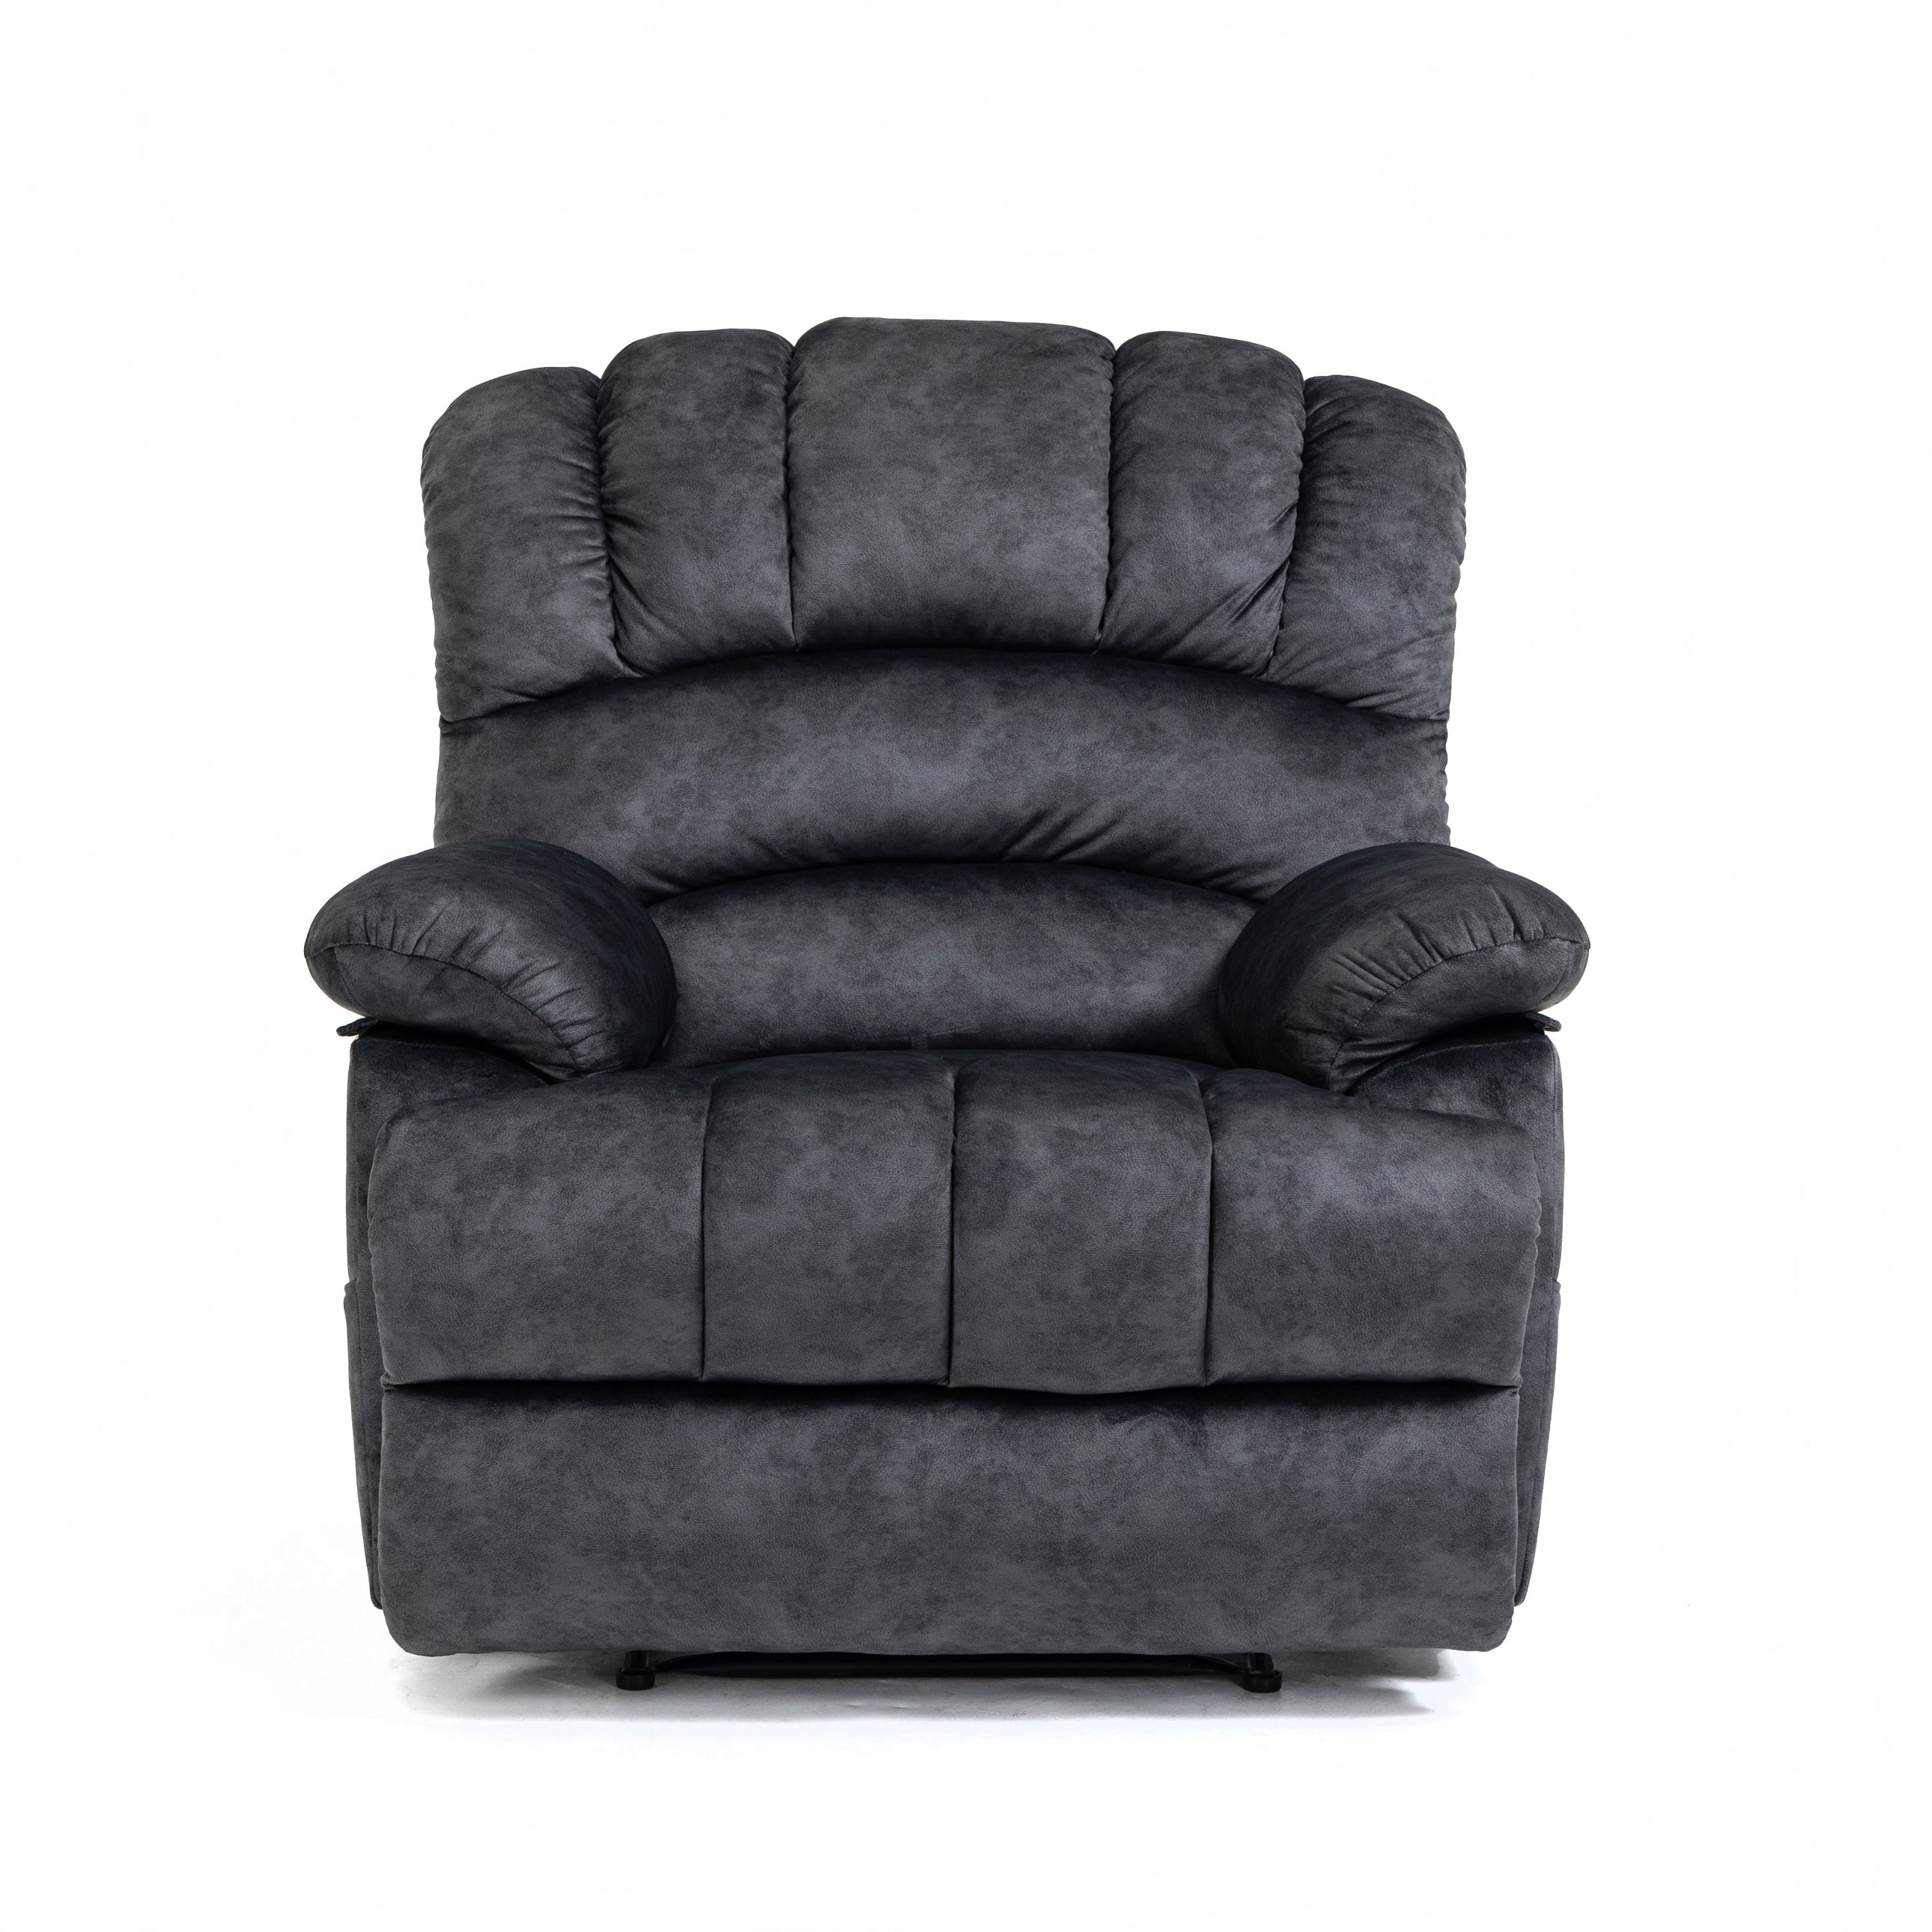 Large Fabric Manual Recliner Chair for Living Room, Heavy Duty, Gray